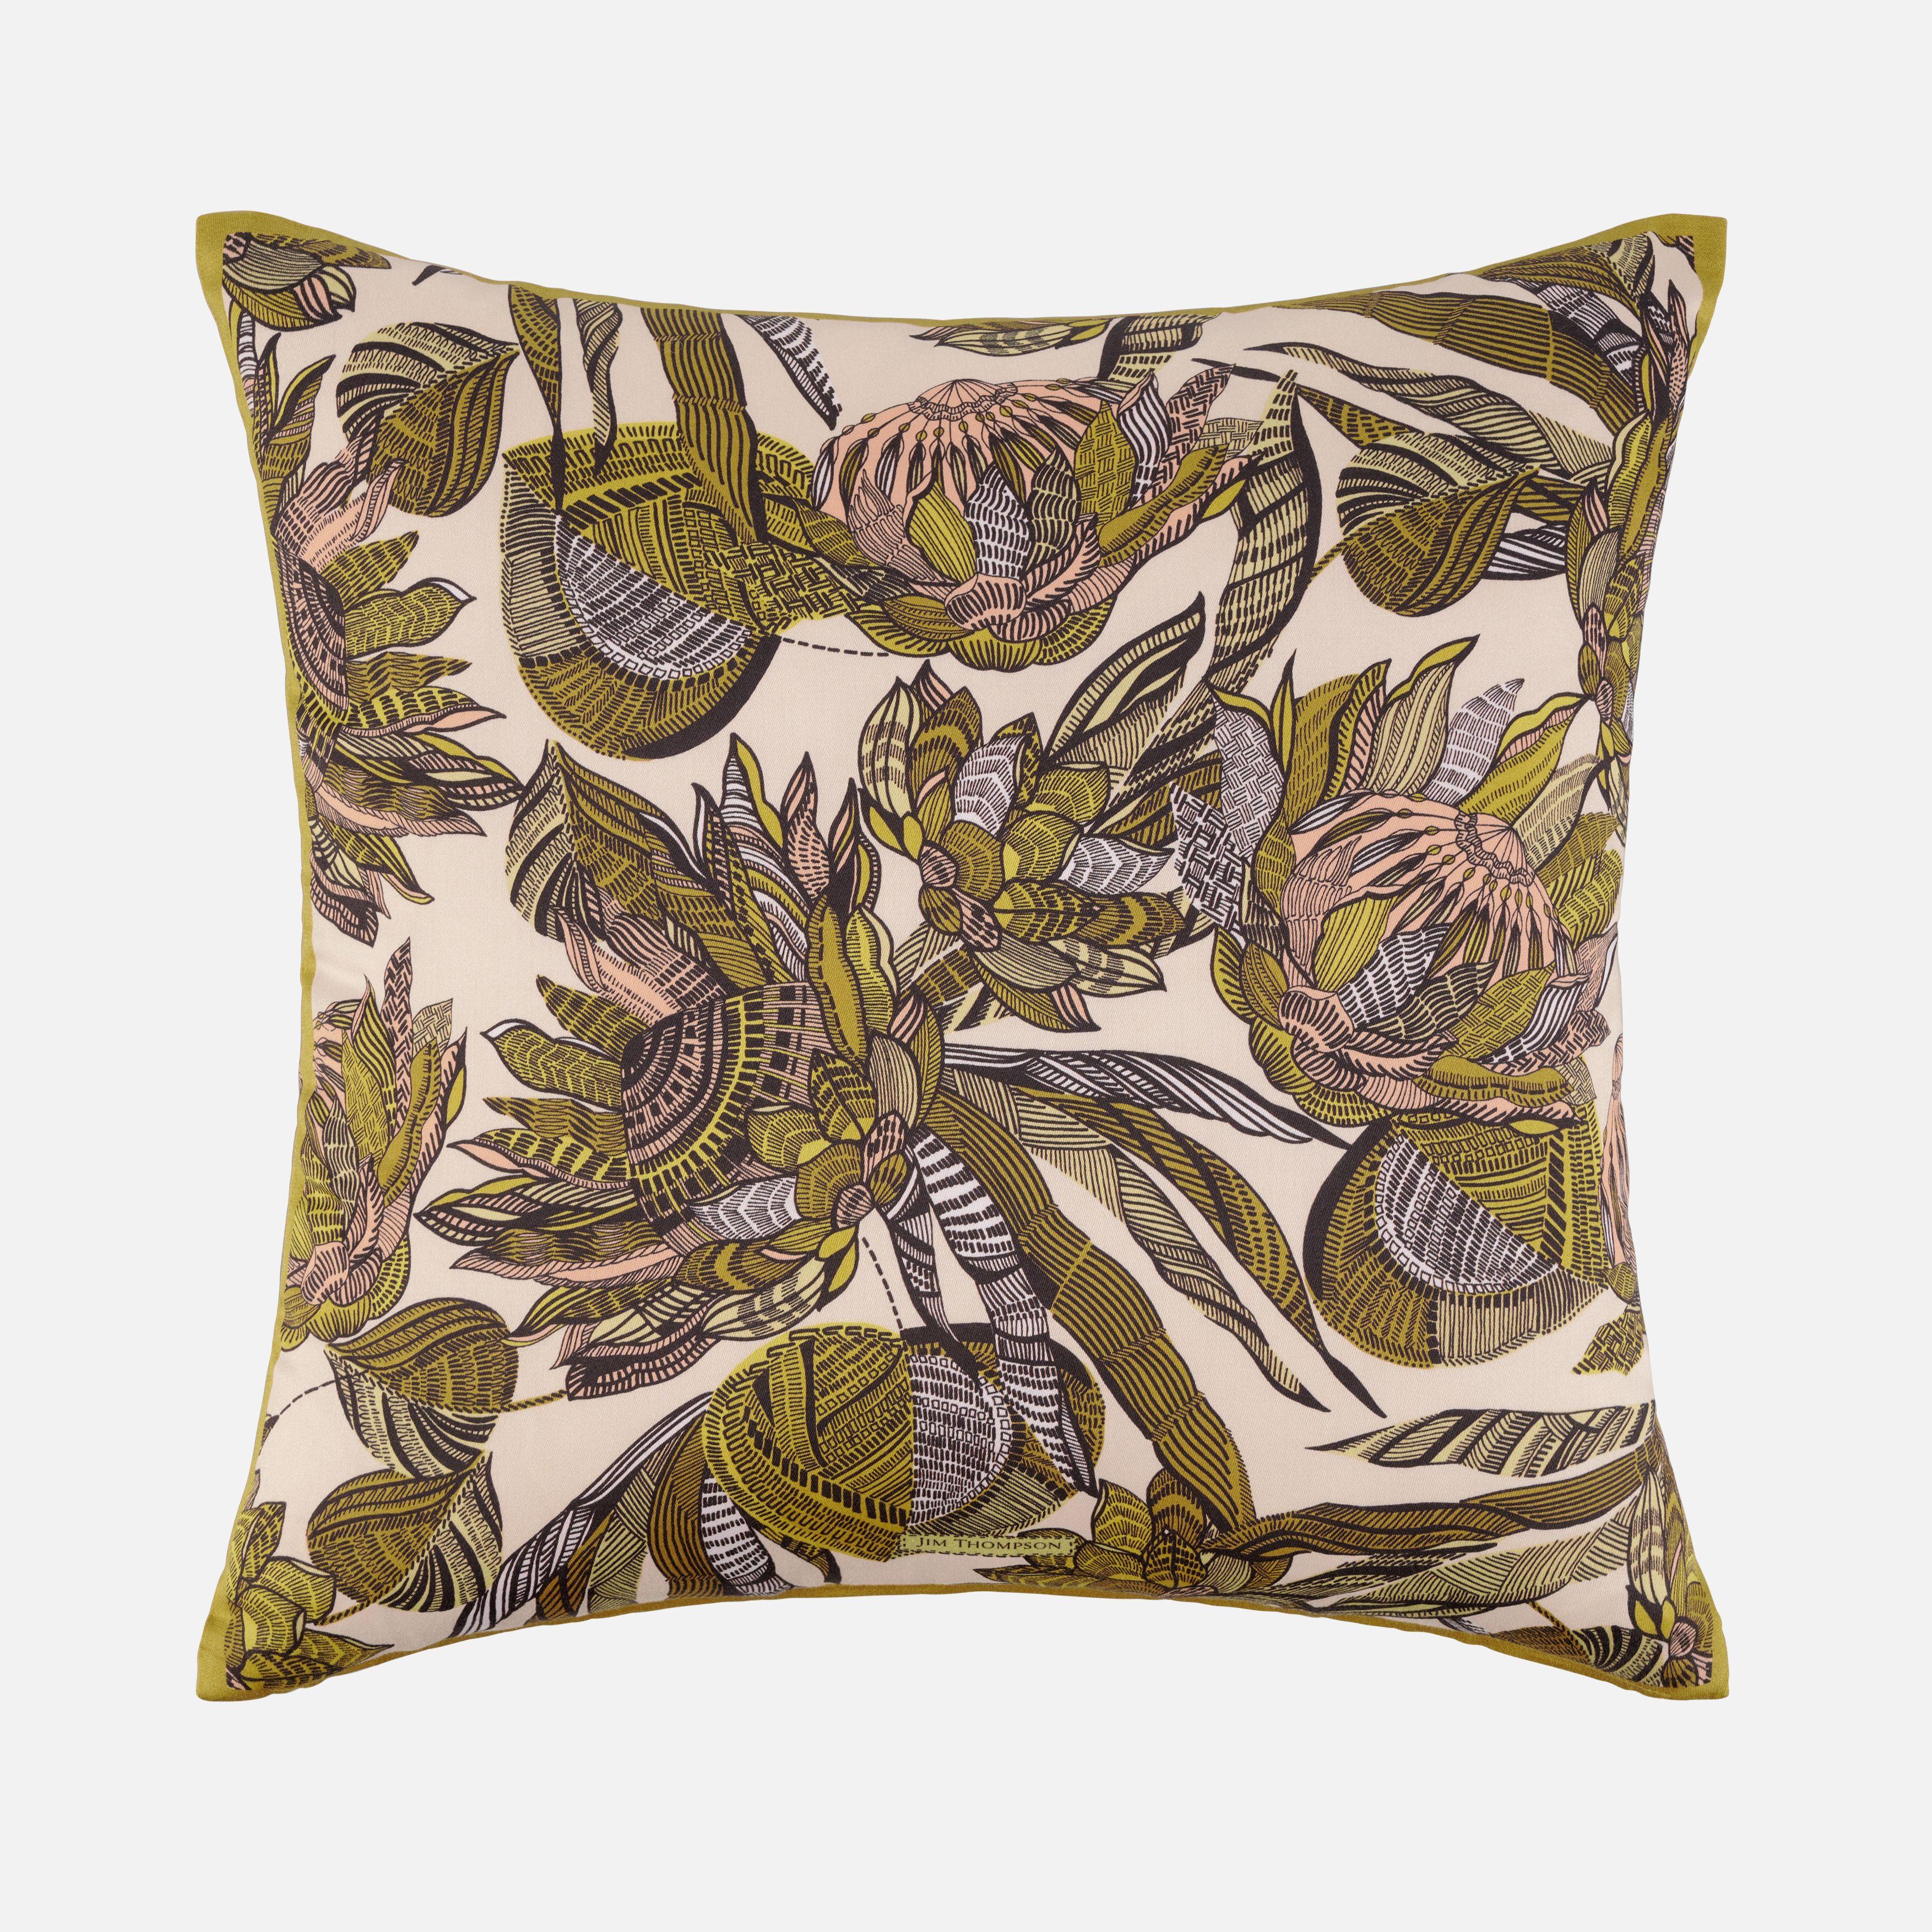 Bamboo Flower Cotton Printed Cushion Cover 18" - Yellow